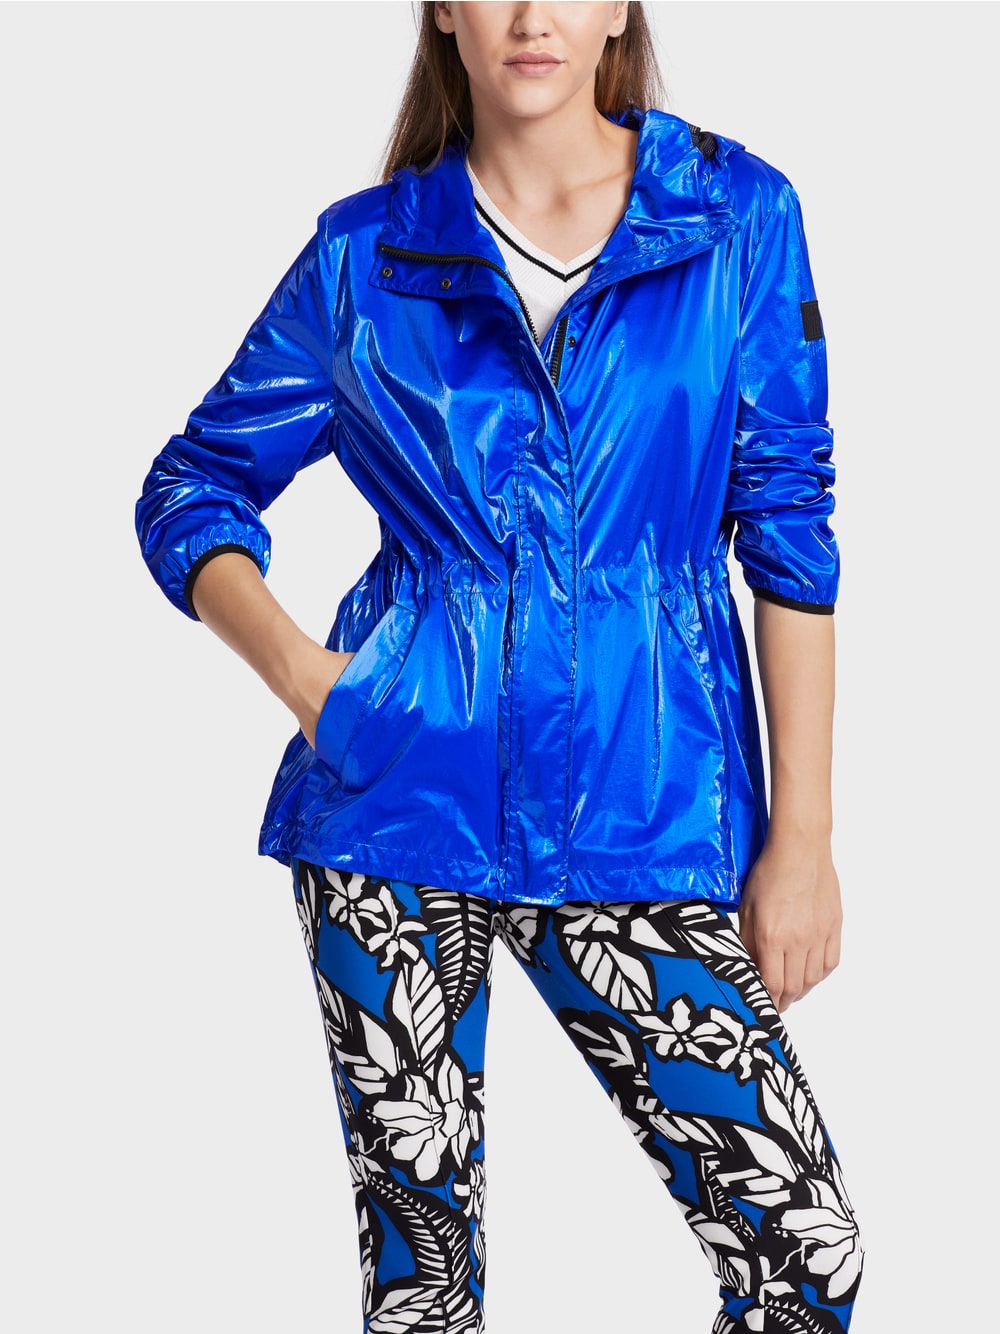 Marc Cain Bright Royal Blue Outdoor jacket with zip and hood